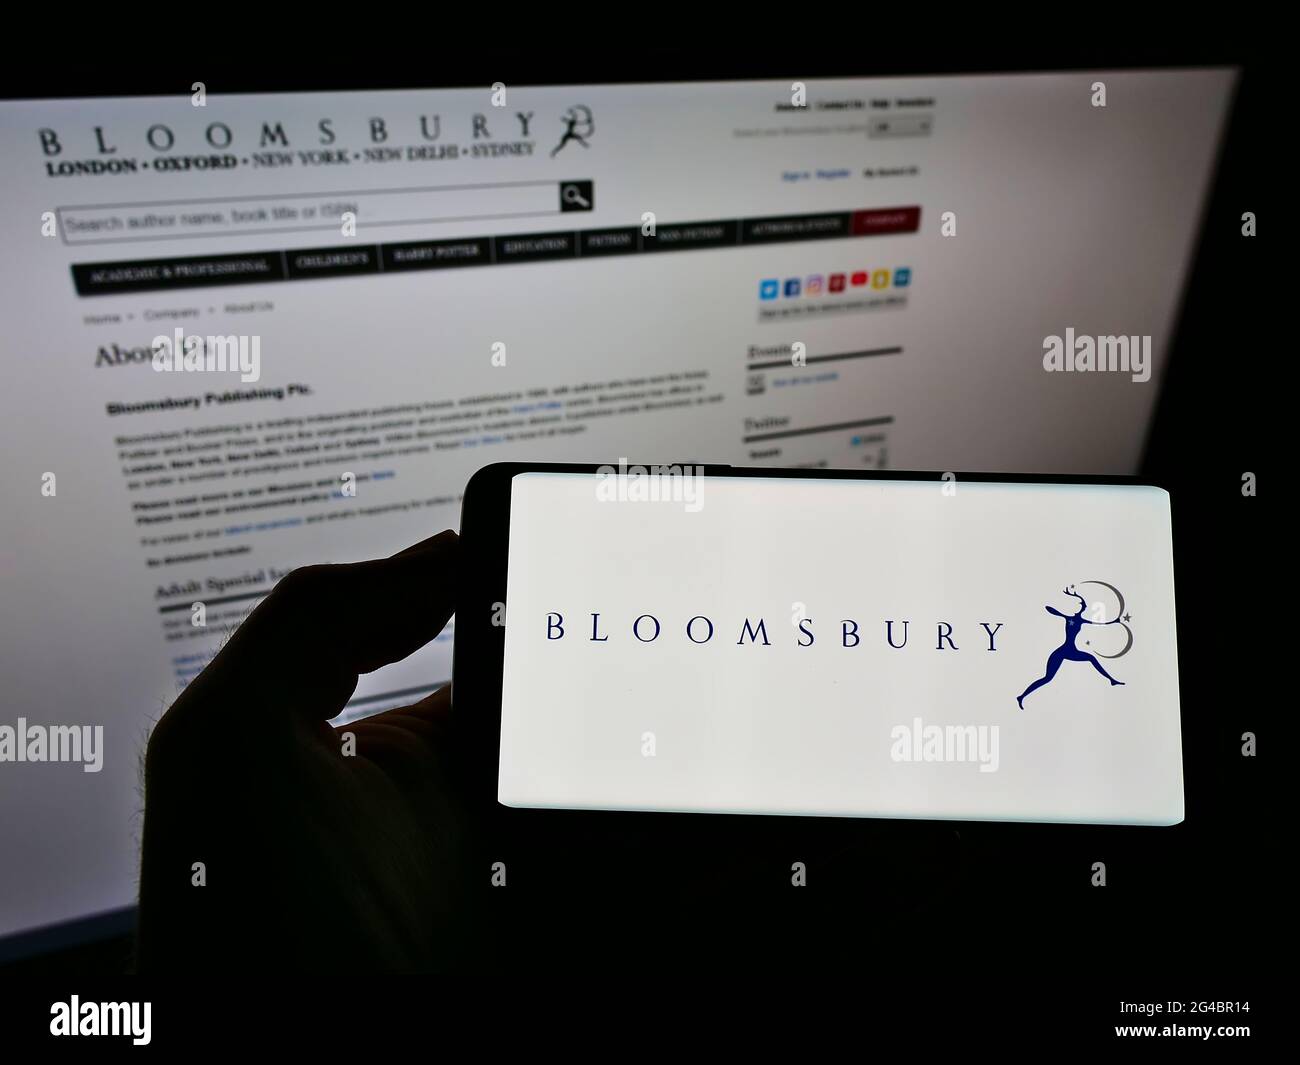 Person holding mobile phone with logo of British publisher Bloomsbury Publishing plc on screen in front of business web page. Focus on phone display. Stock Photo